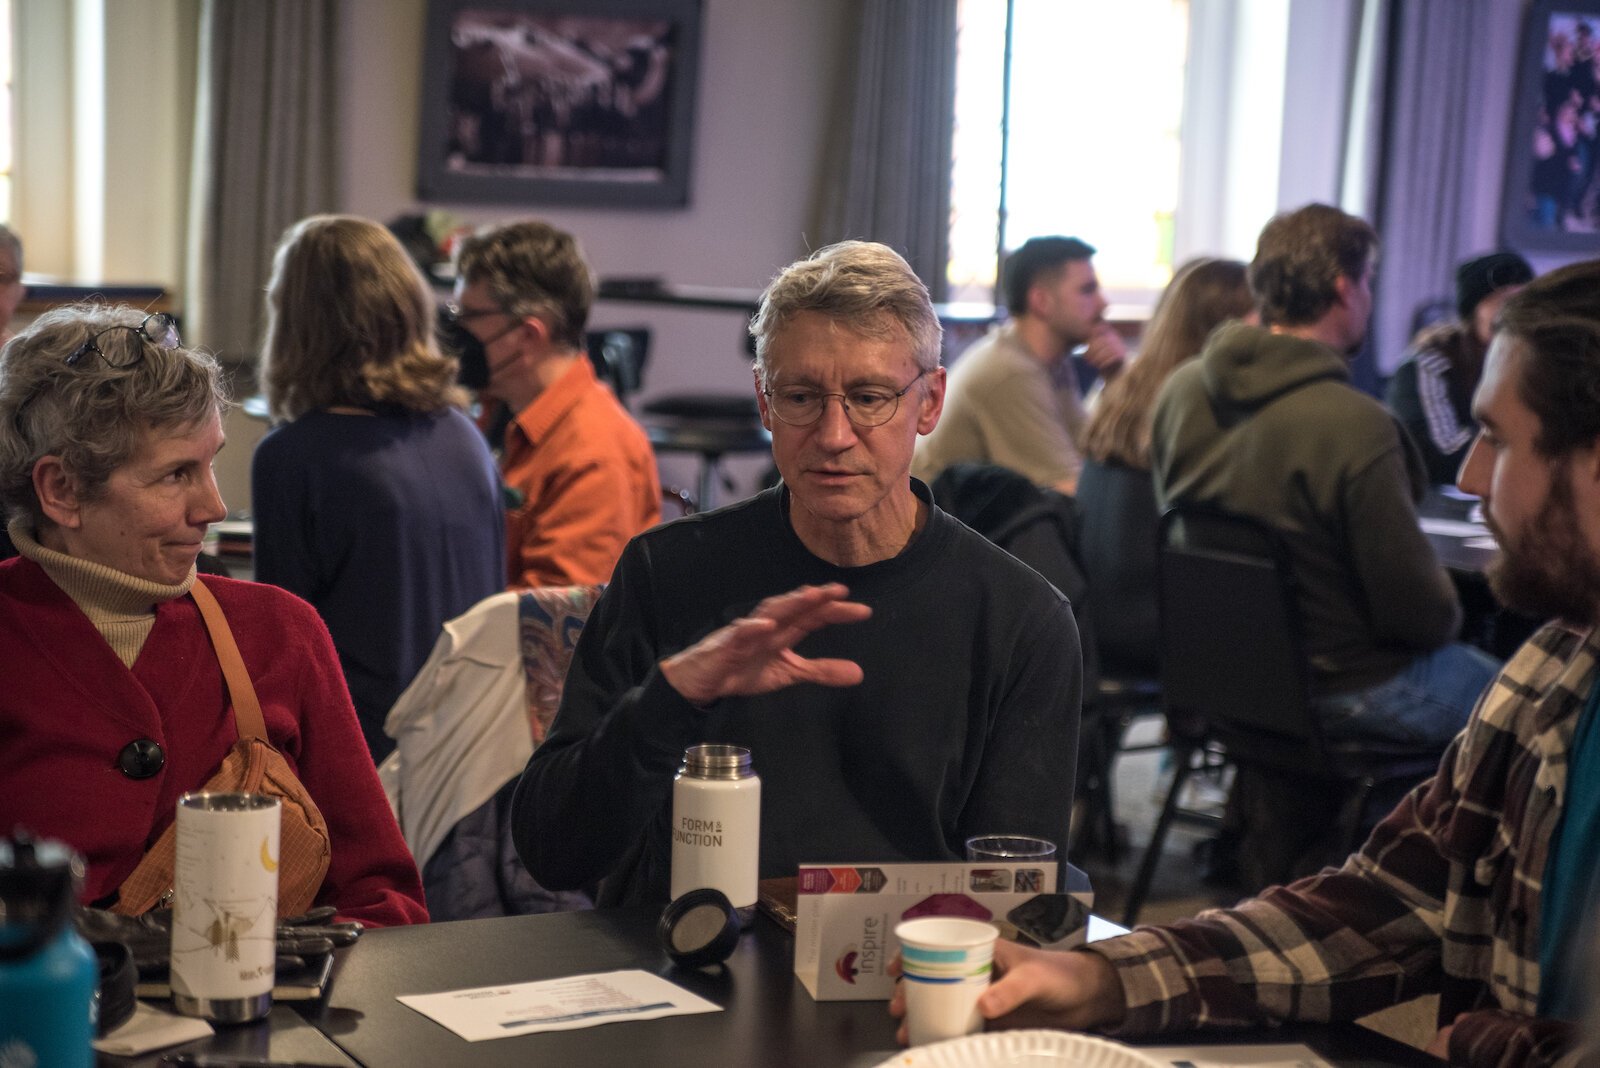 Over 50 people attended the second bi-monthly Kalamazoo Lyceum.